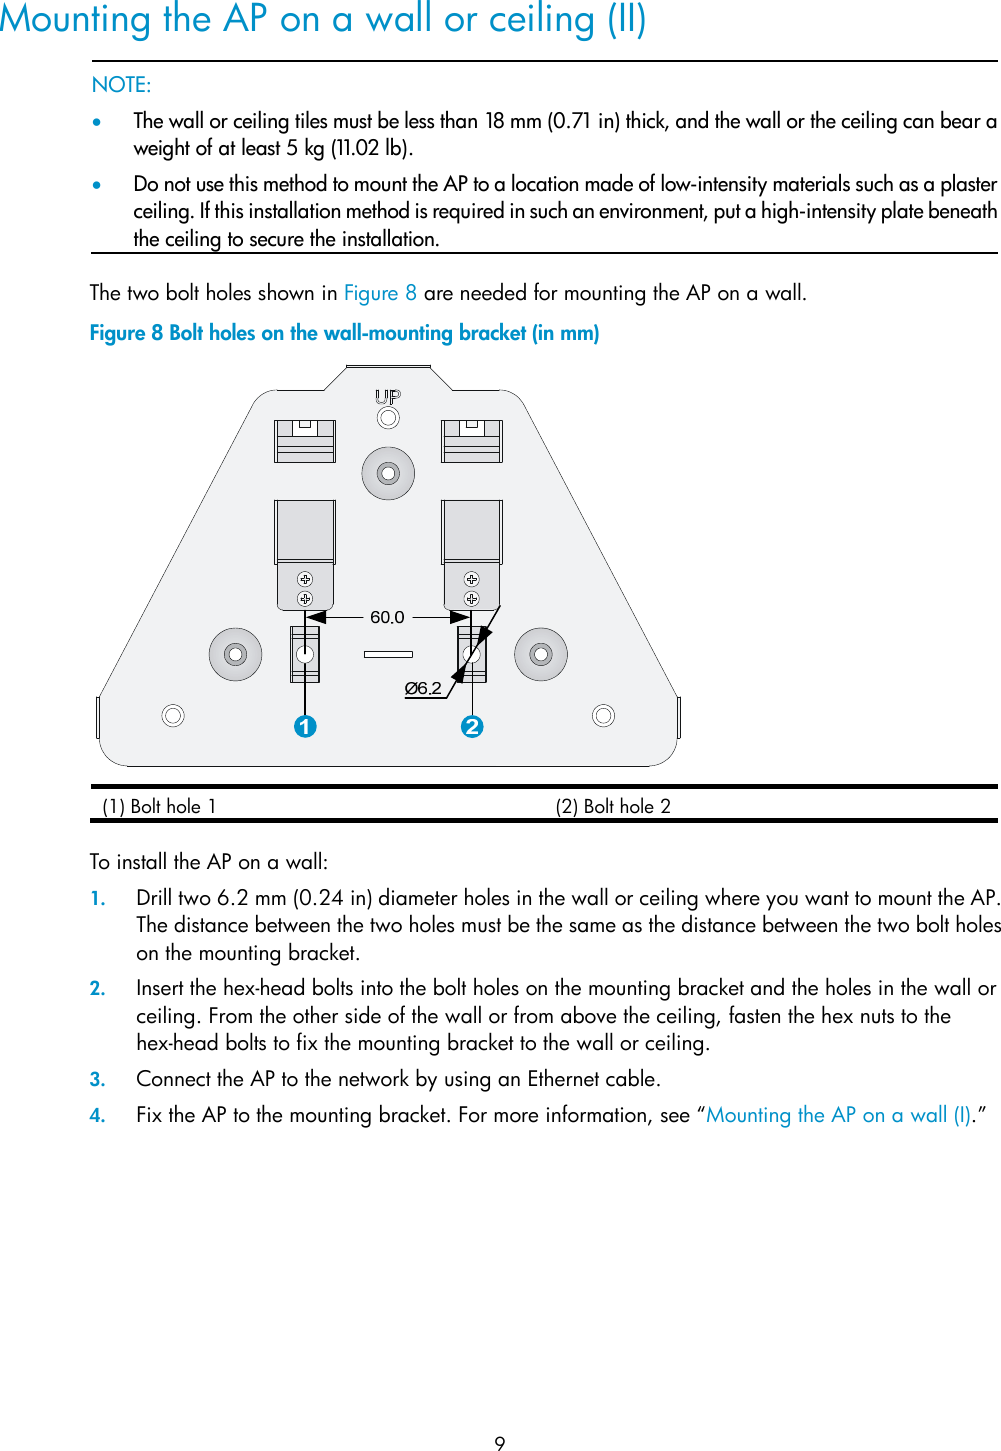  9 Mounting the AP on a wall or ceiling (II)   NOTE: • The wall or ceiling tiles must be less than 18 mm (0.71 in) thick, and the wall or the ceiling can bear aweight of at least 5 kg (11.02 lb). • Do not use this method to mount the AP to a location made of low-intensity materials such as a plasterceiling. If this installation method is required in such an environment, put a high-intensity plate beneaththe ceiling to secure the installation.  The two bolt holes shown in Figure 8 are needed for mounting the AP on a wall. Figure 8 Bolt holes on the wall-mounting bracket (in mm)  (1) Bolt hole 1  (2) Bolt hole 2  To install the AP on a wall: 1. Drill two 6.2 mm (0.24 in) diameter holes in the wall or ceiling where you want to mount the AP. The distance between the two holes must be the same as the distance between the two bolt holes on the mounting bracket. 2. Insert the hex-head bolts into the bolt holes on the mounting bracket and the holes in the wall or ceiling. From the other side of the wall or from above the ceiling, fasten the hex nuts to the hex-head bolts to fix the mounting bracket to the wall or ceiling. 3. Connect the AP to the network by using an Ethernet cable. 4. Fix the AP to the mounting bracket. For more information, see “Mounting the AP on a wall (I).” 